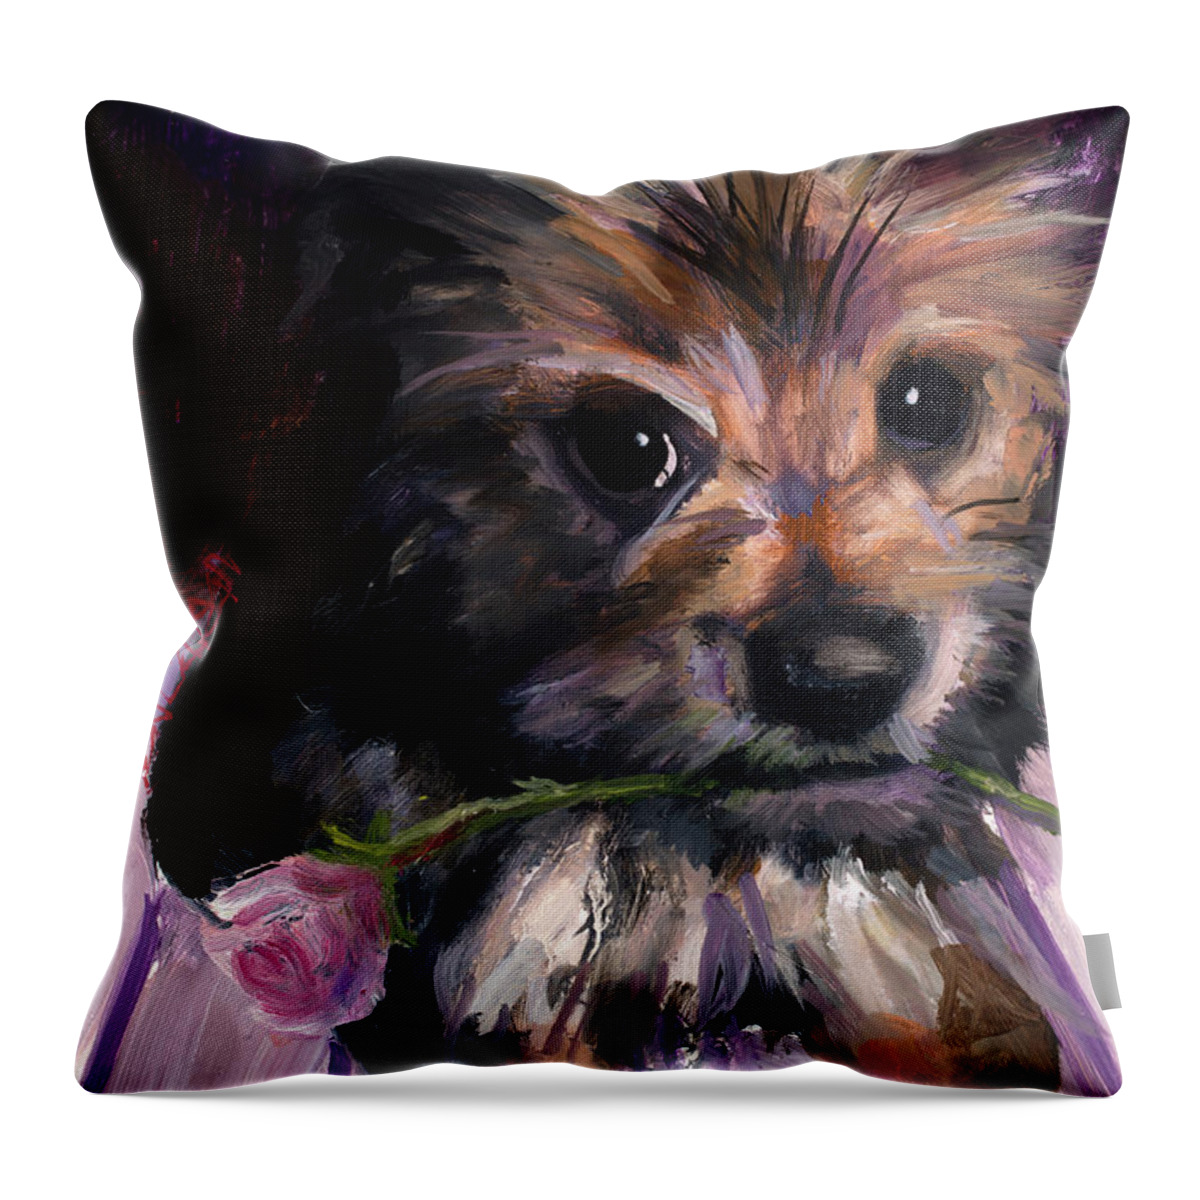 Yorkie Throw Pillow featuring the painting Pint Sized Love by Billie Colson